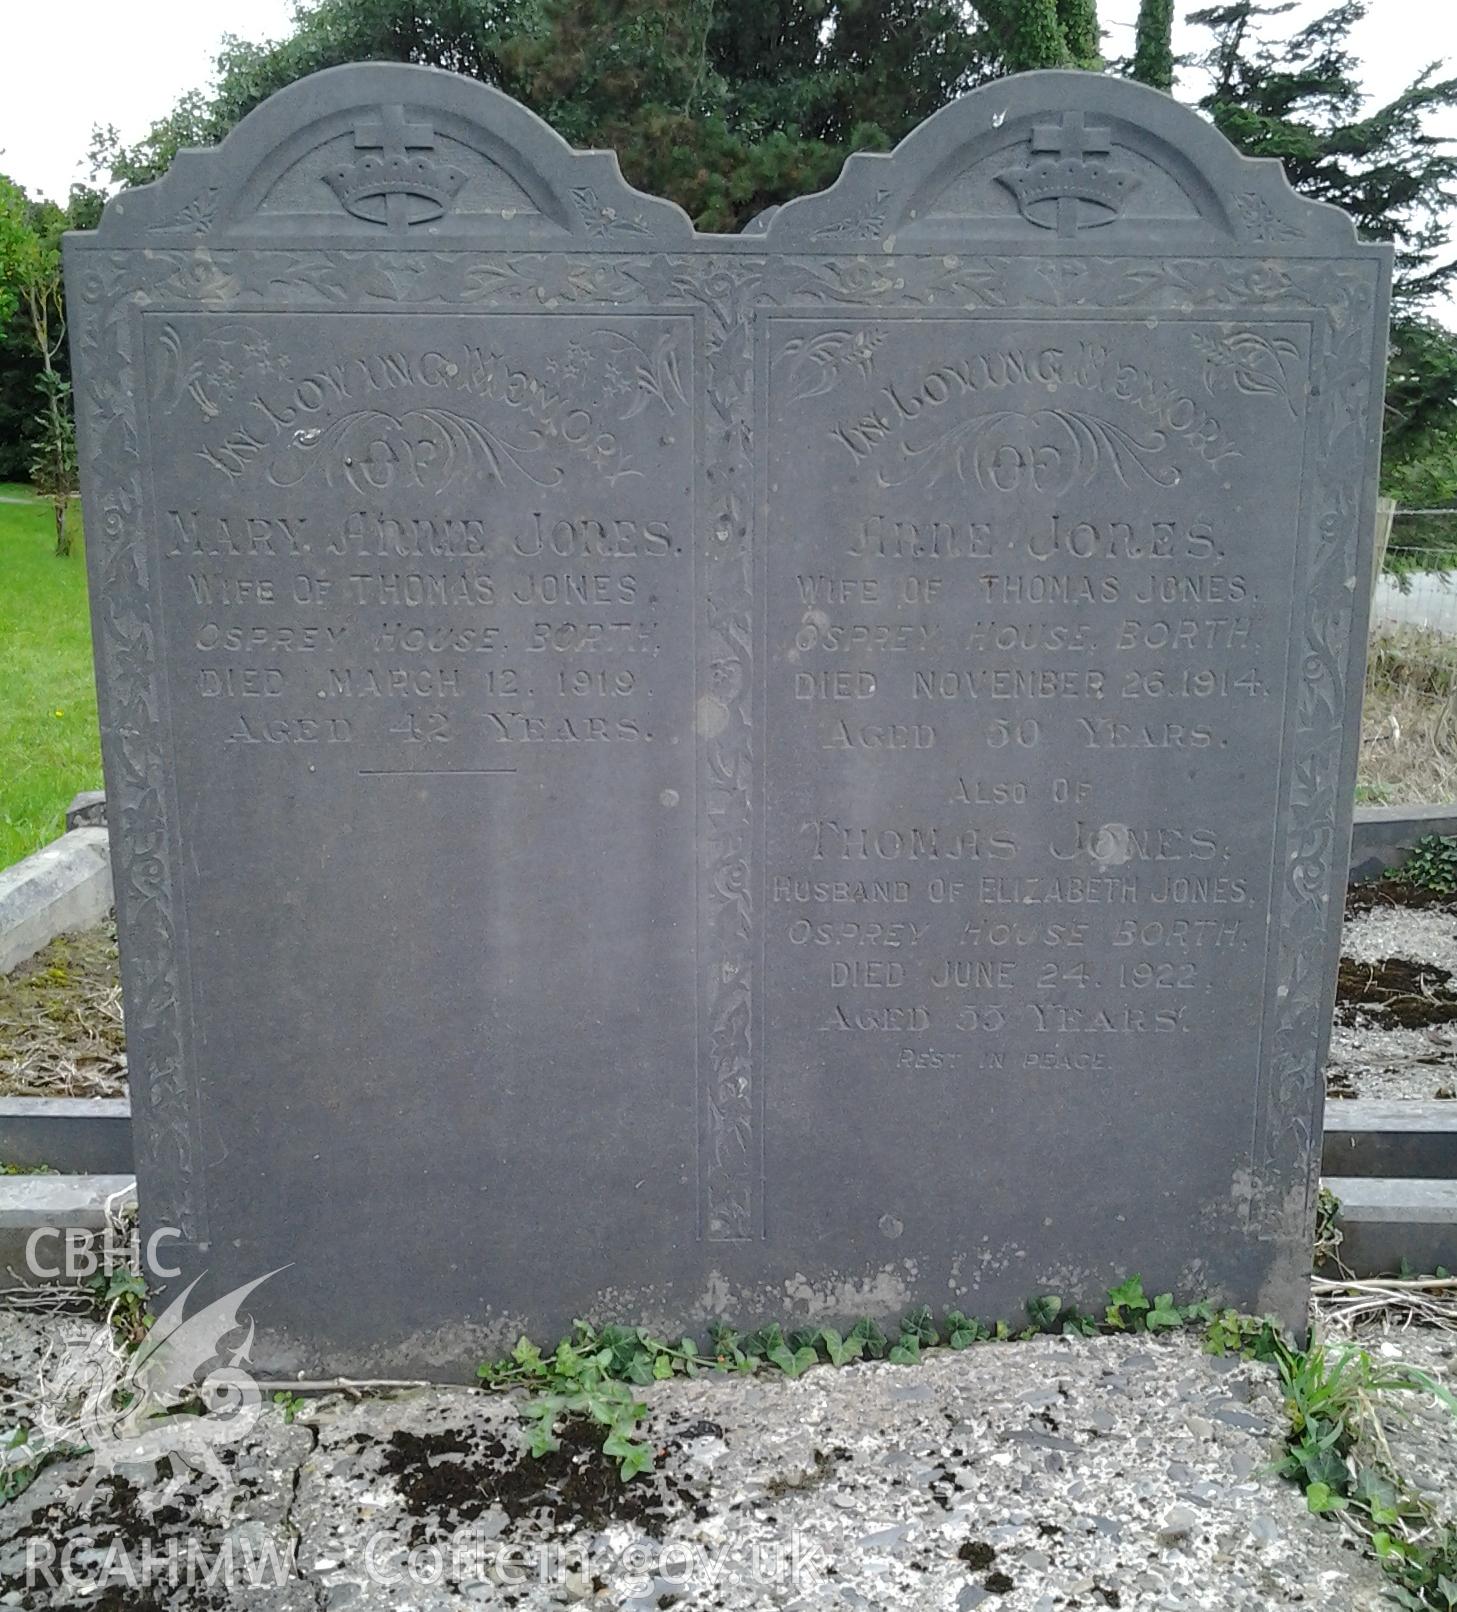 Memorials of Mary Anne Jones (died March 12 1919), Anne Jones (died November 26 1914), both wives of Thomas Jones, also remembered (died June 24 1922) all of Osprey House, Borth